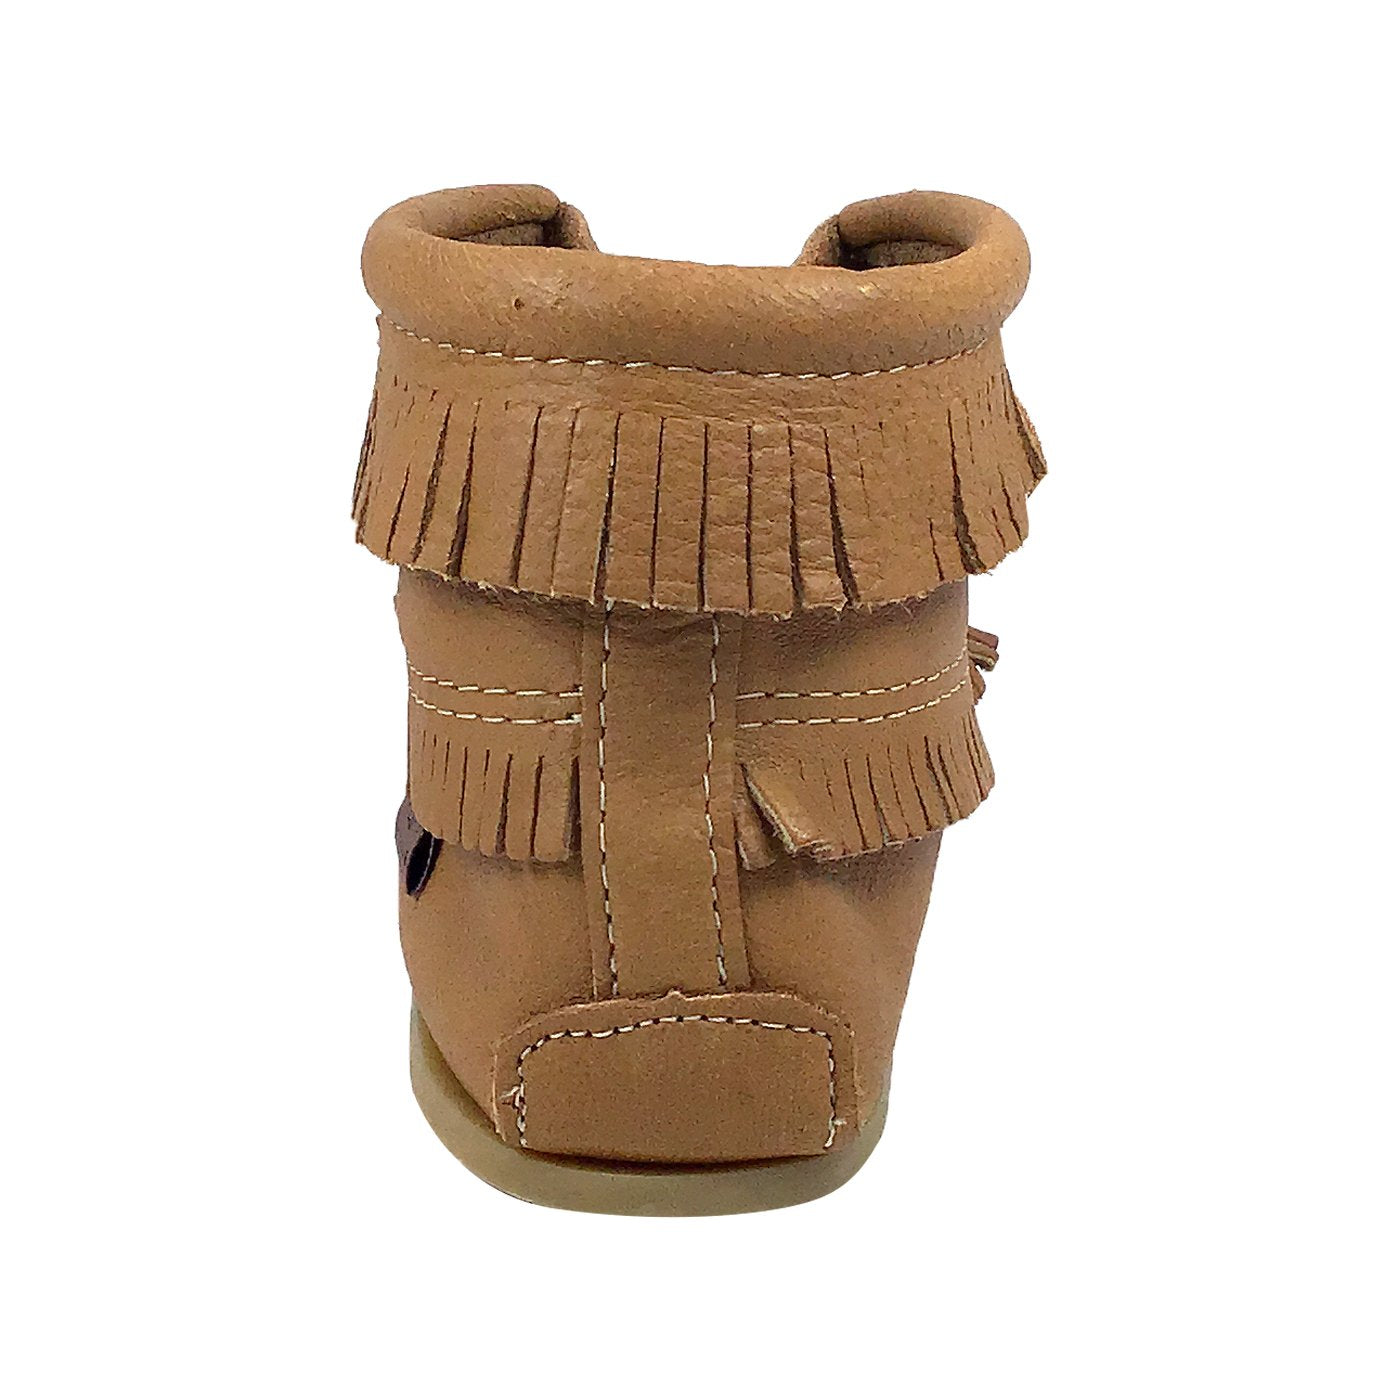 Women's Apache Cork Moccasin Boots (Final Clearance 5, 6, 7 ONLY)